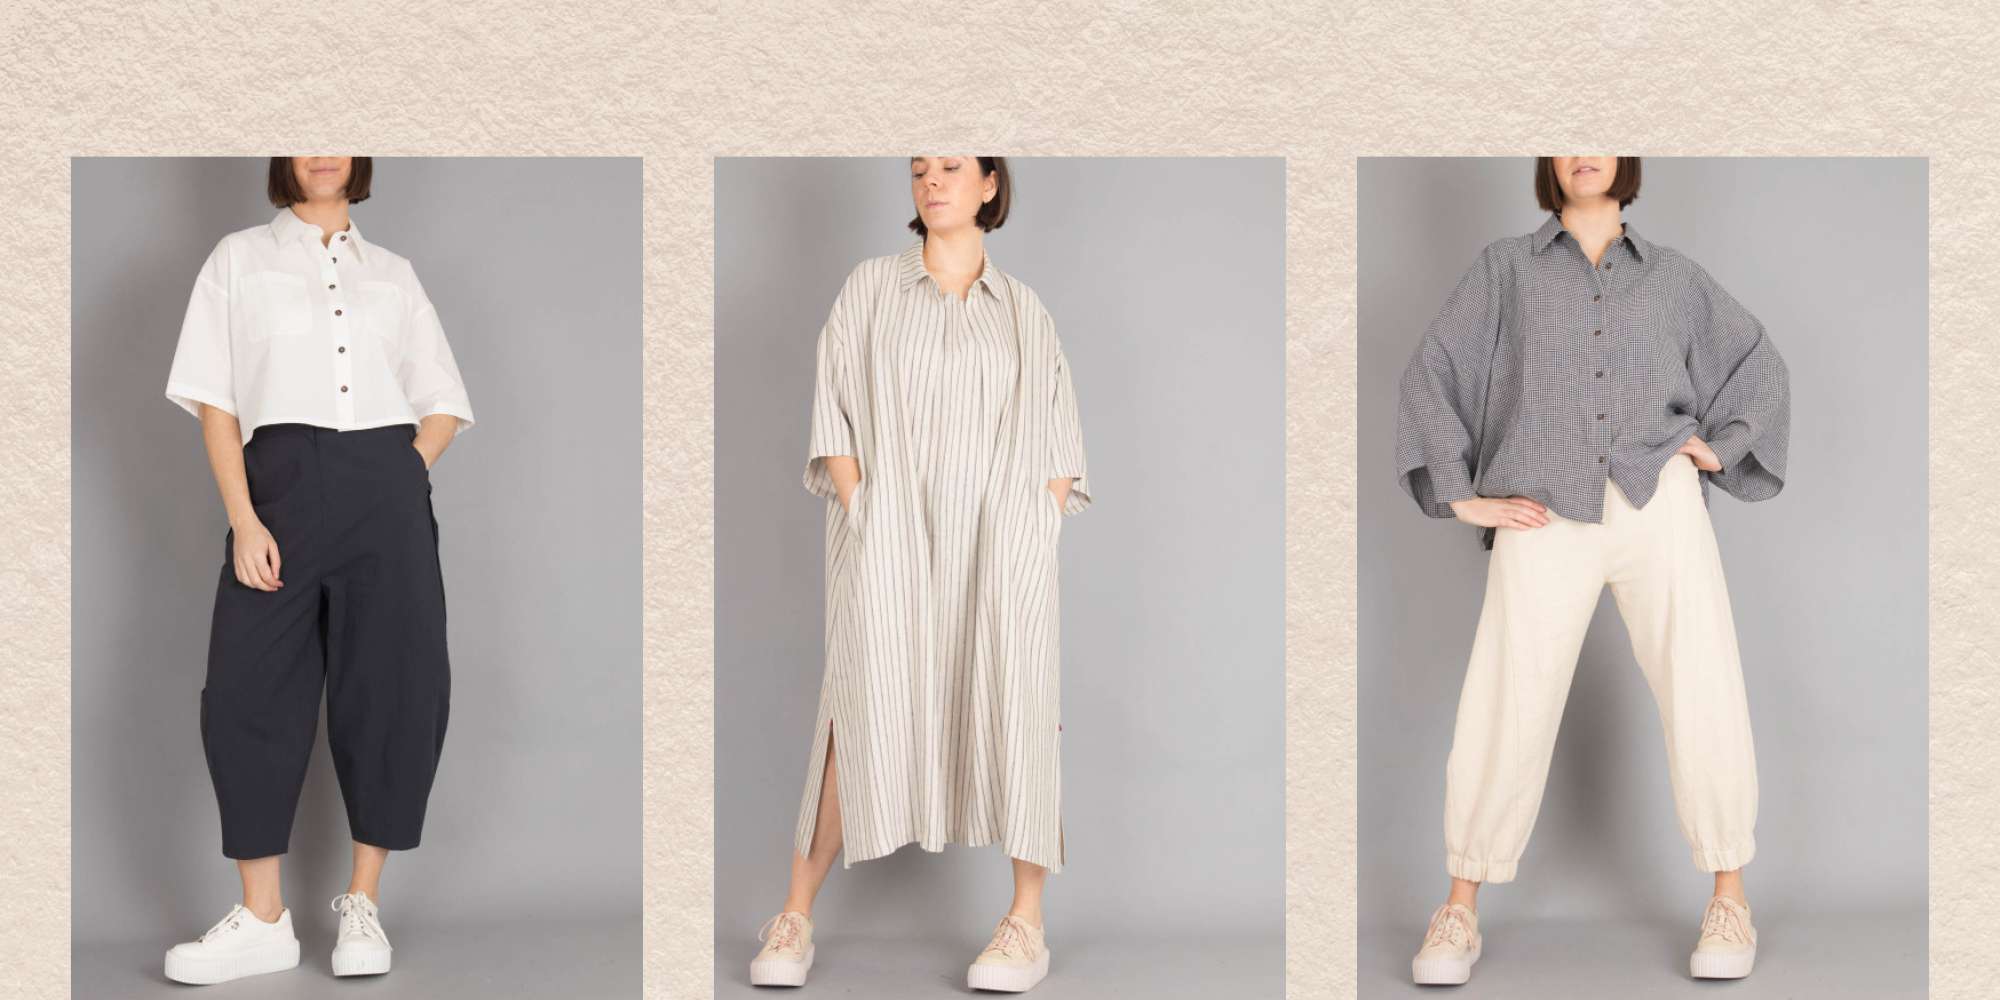 Soh at Walkers.Style online women's fashion and clothing shop - One of our new designers this season is SOH, a designer from Korea focusing on exceptional fabrics & impeccable details. The garments are timeless with a minimal aesthetic and a touch of difference.